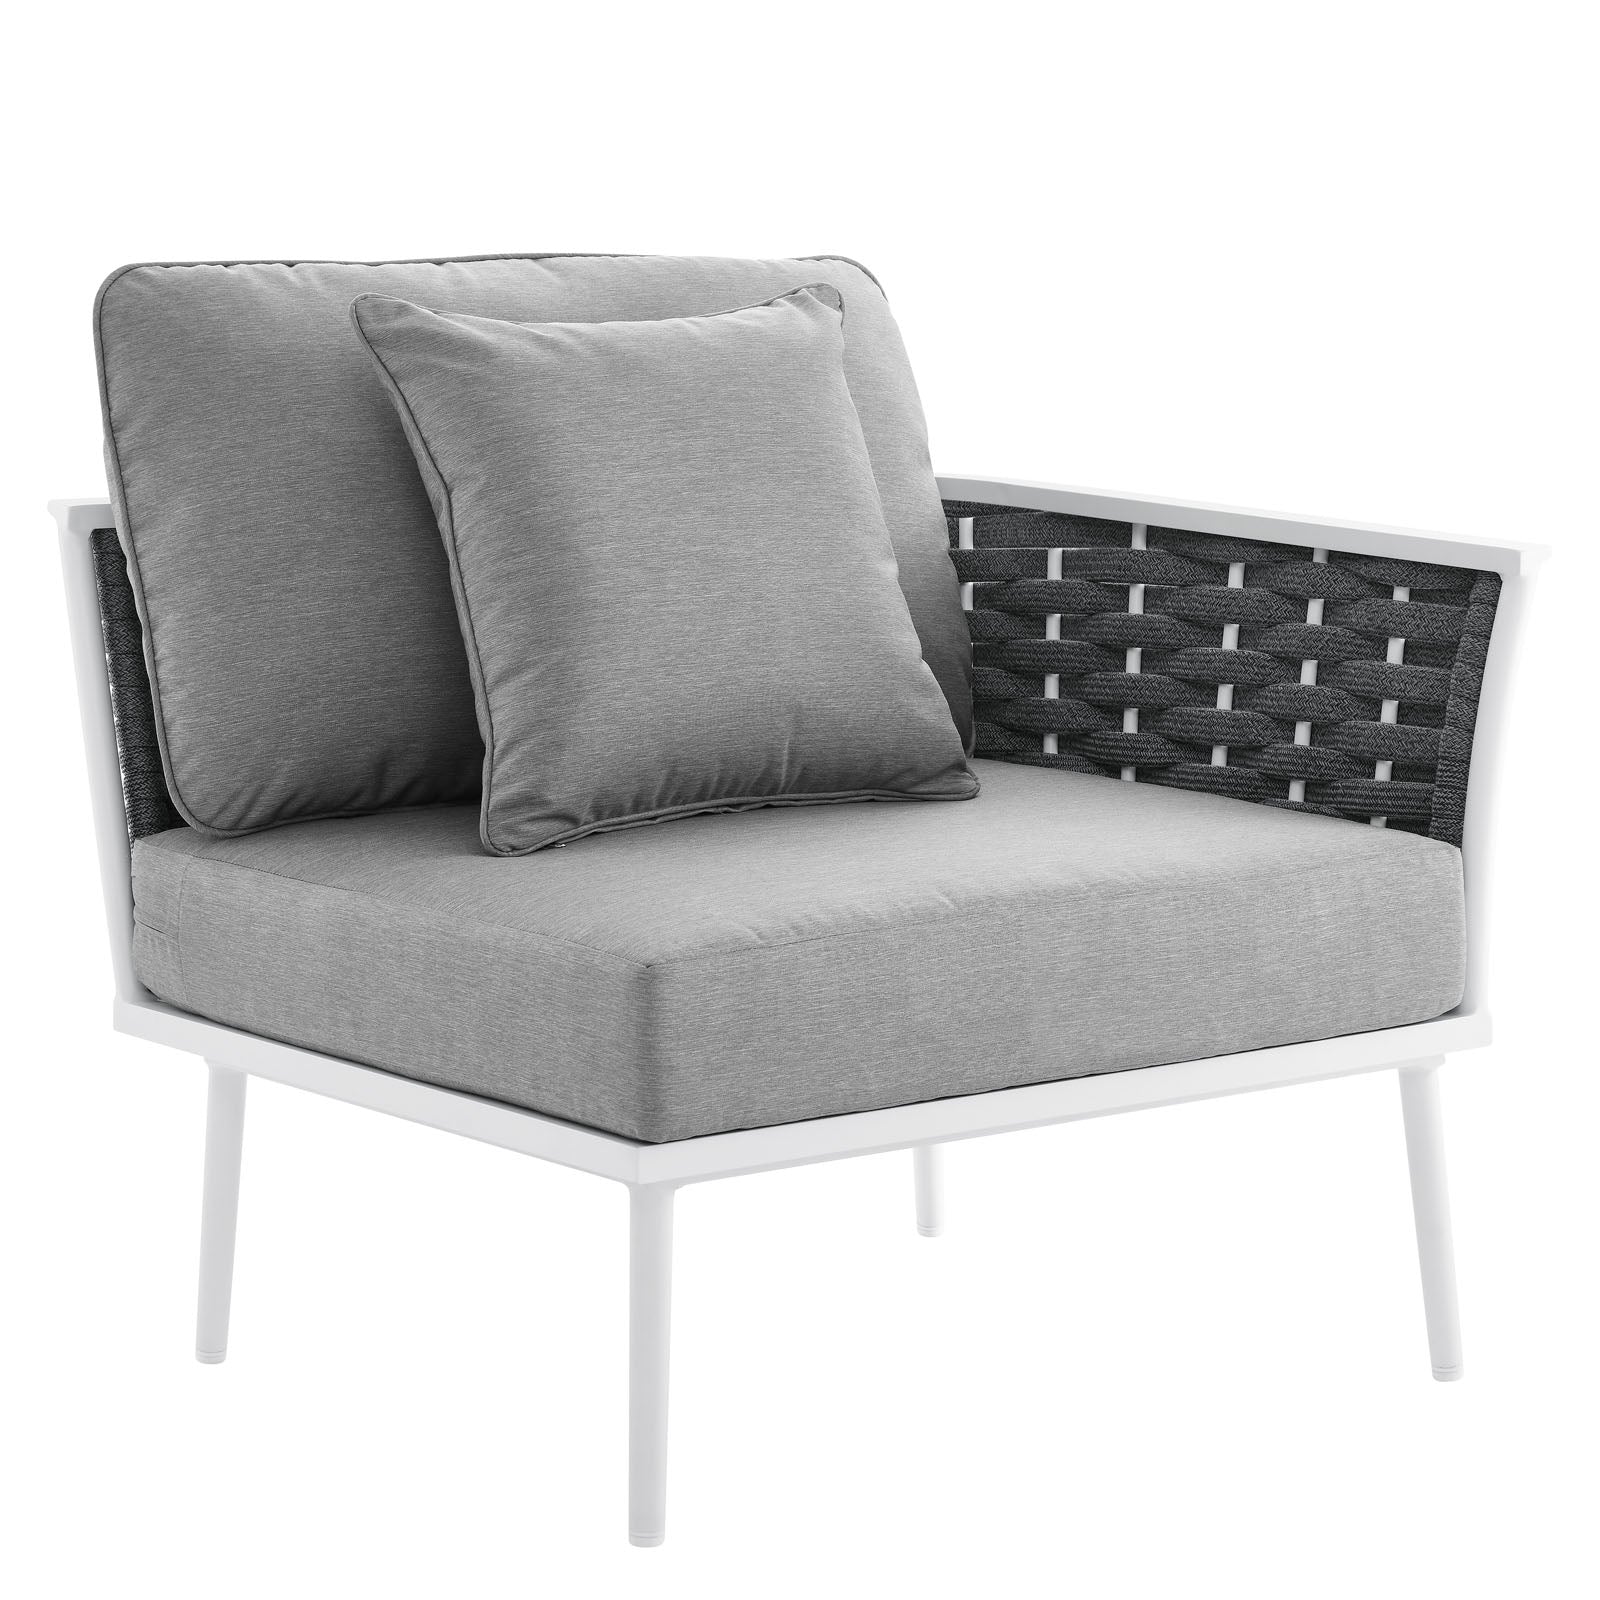 Stance Outdoor Patio Aluminum Small Sectional Sofa - East Shore Modern Home Furnishings